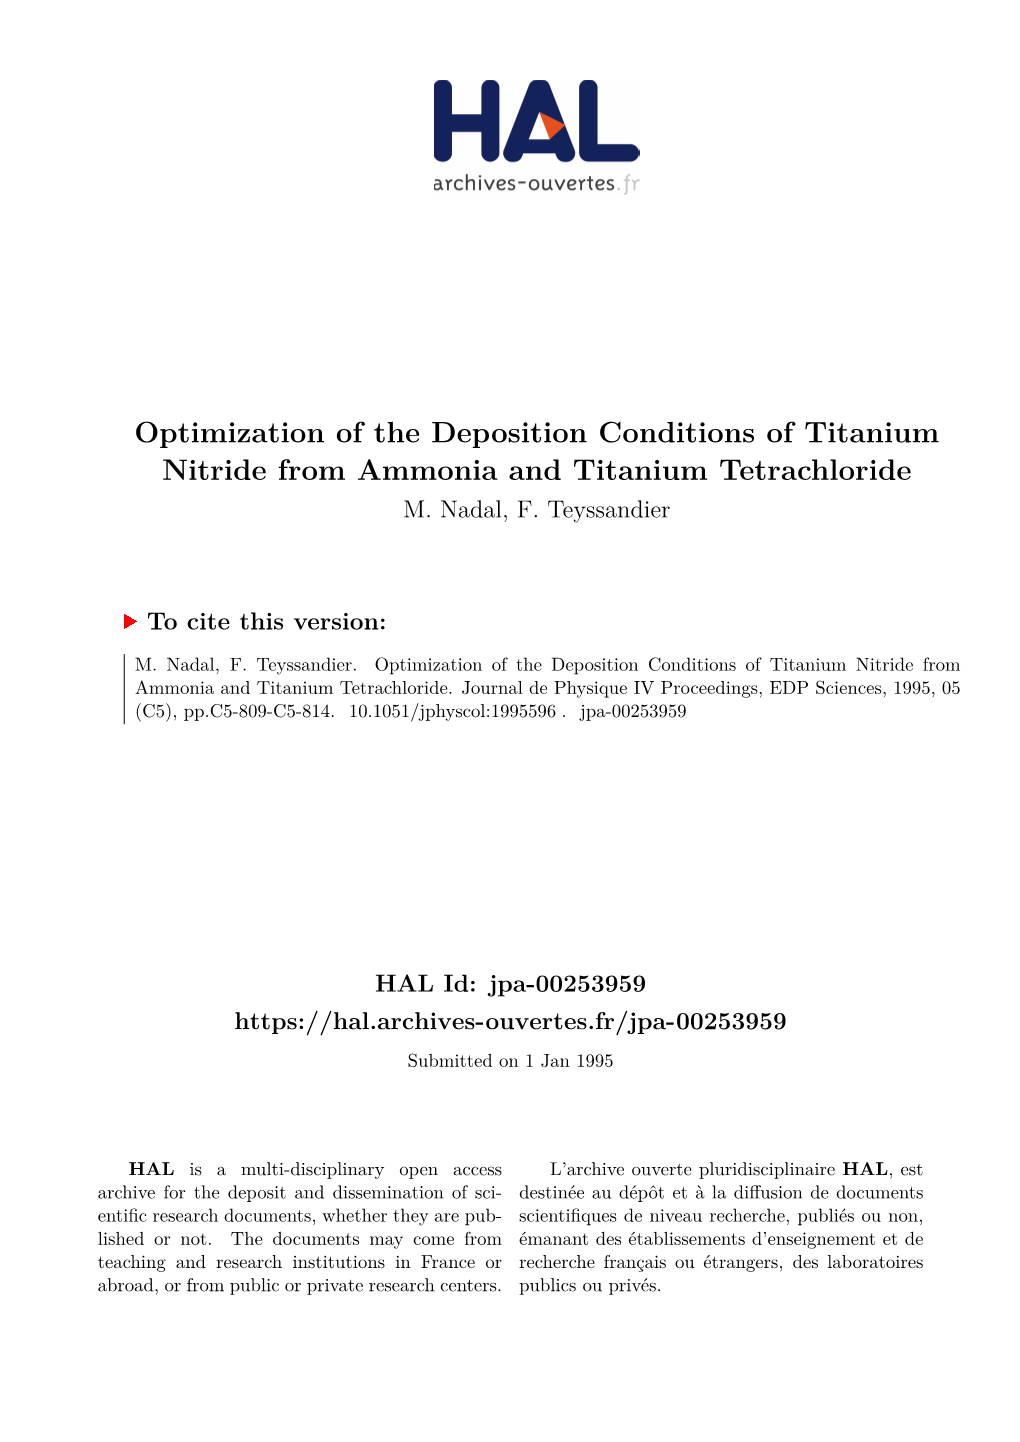 Optimization of the Deposition Conditions of Titanium Nitride from Ammonia and Titanium Tetrachloride M